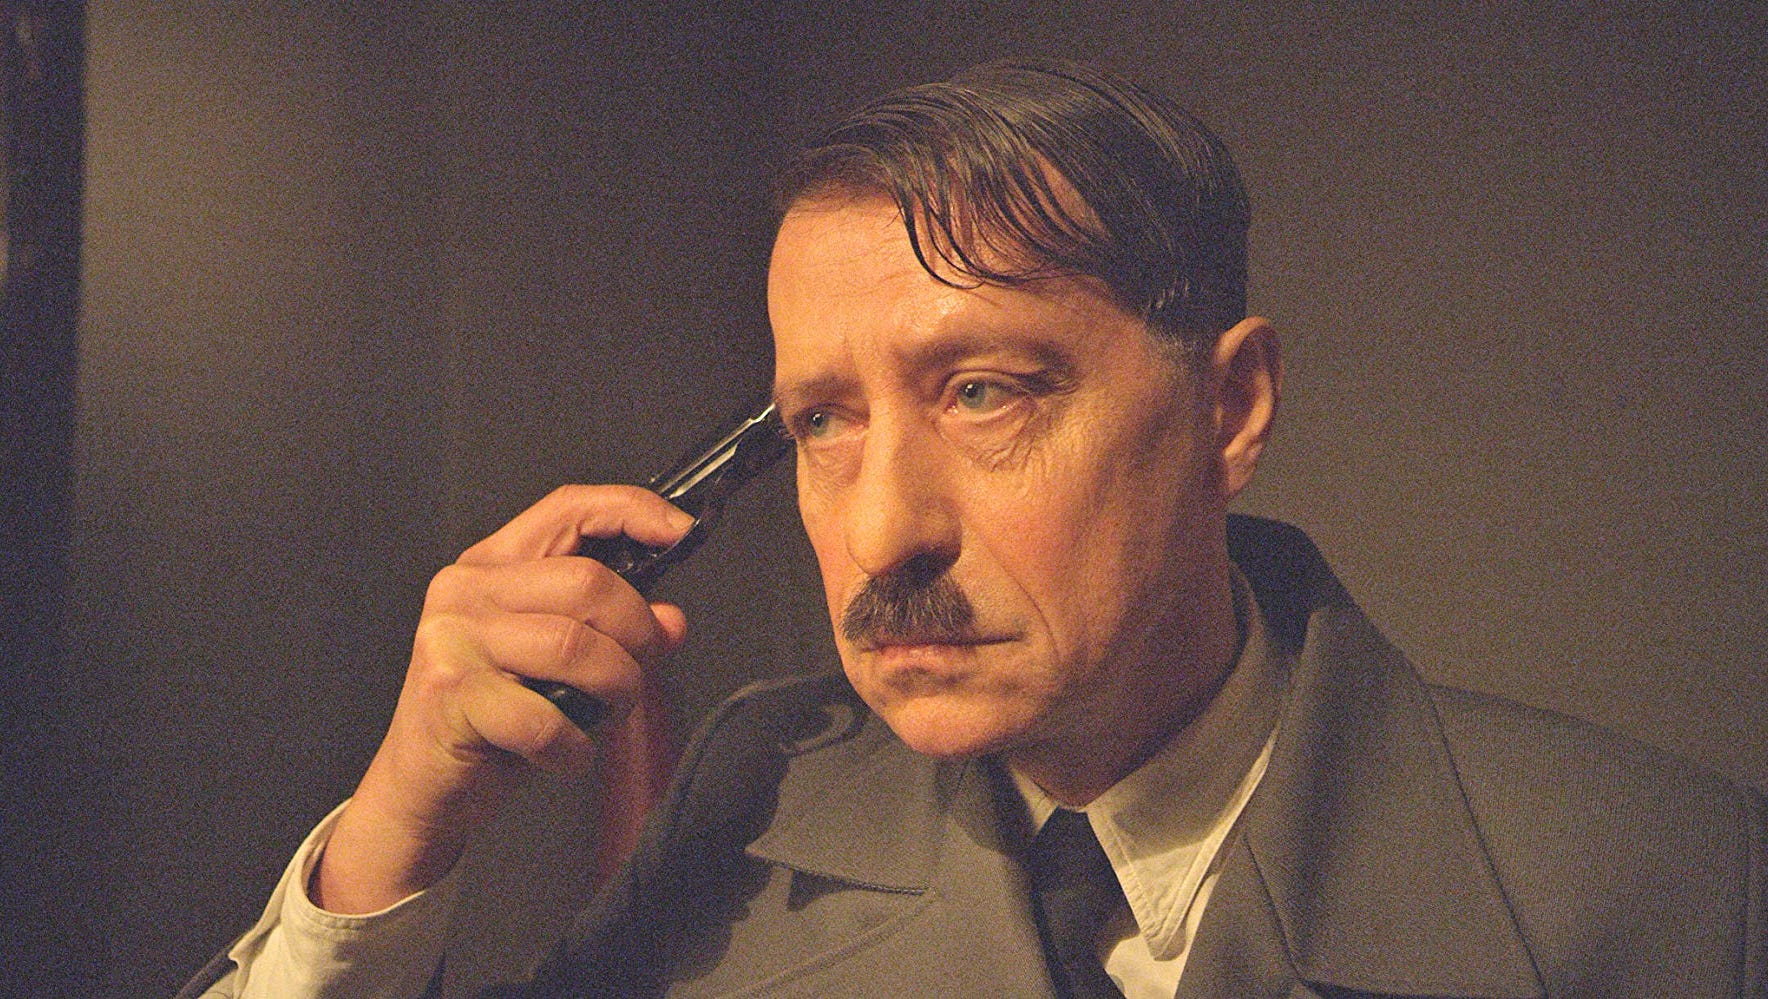 Pavel Kríz as Adolf Hitler in "Death of a Nation."